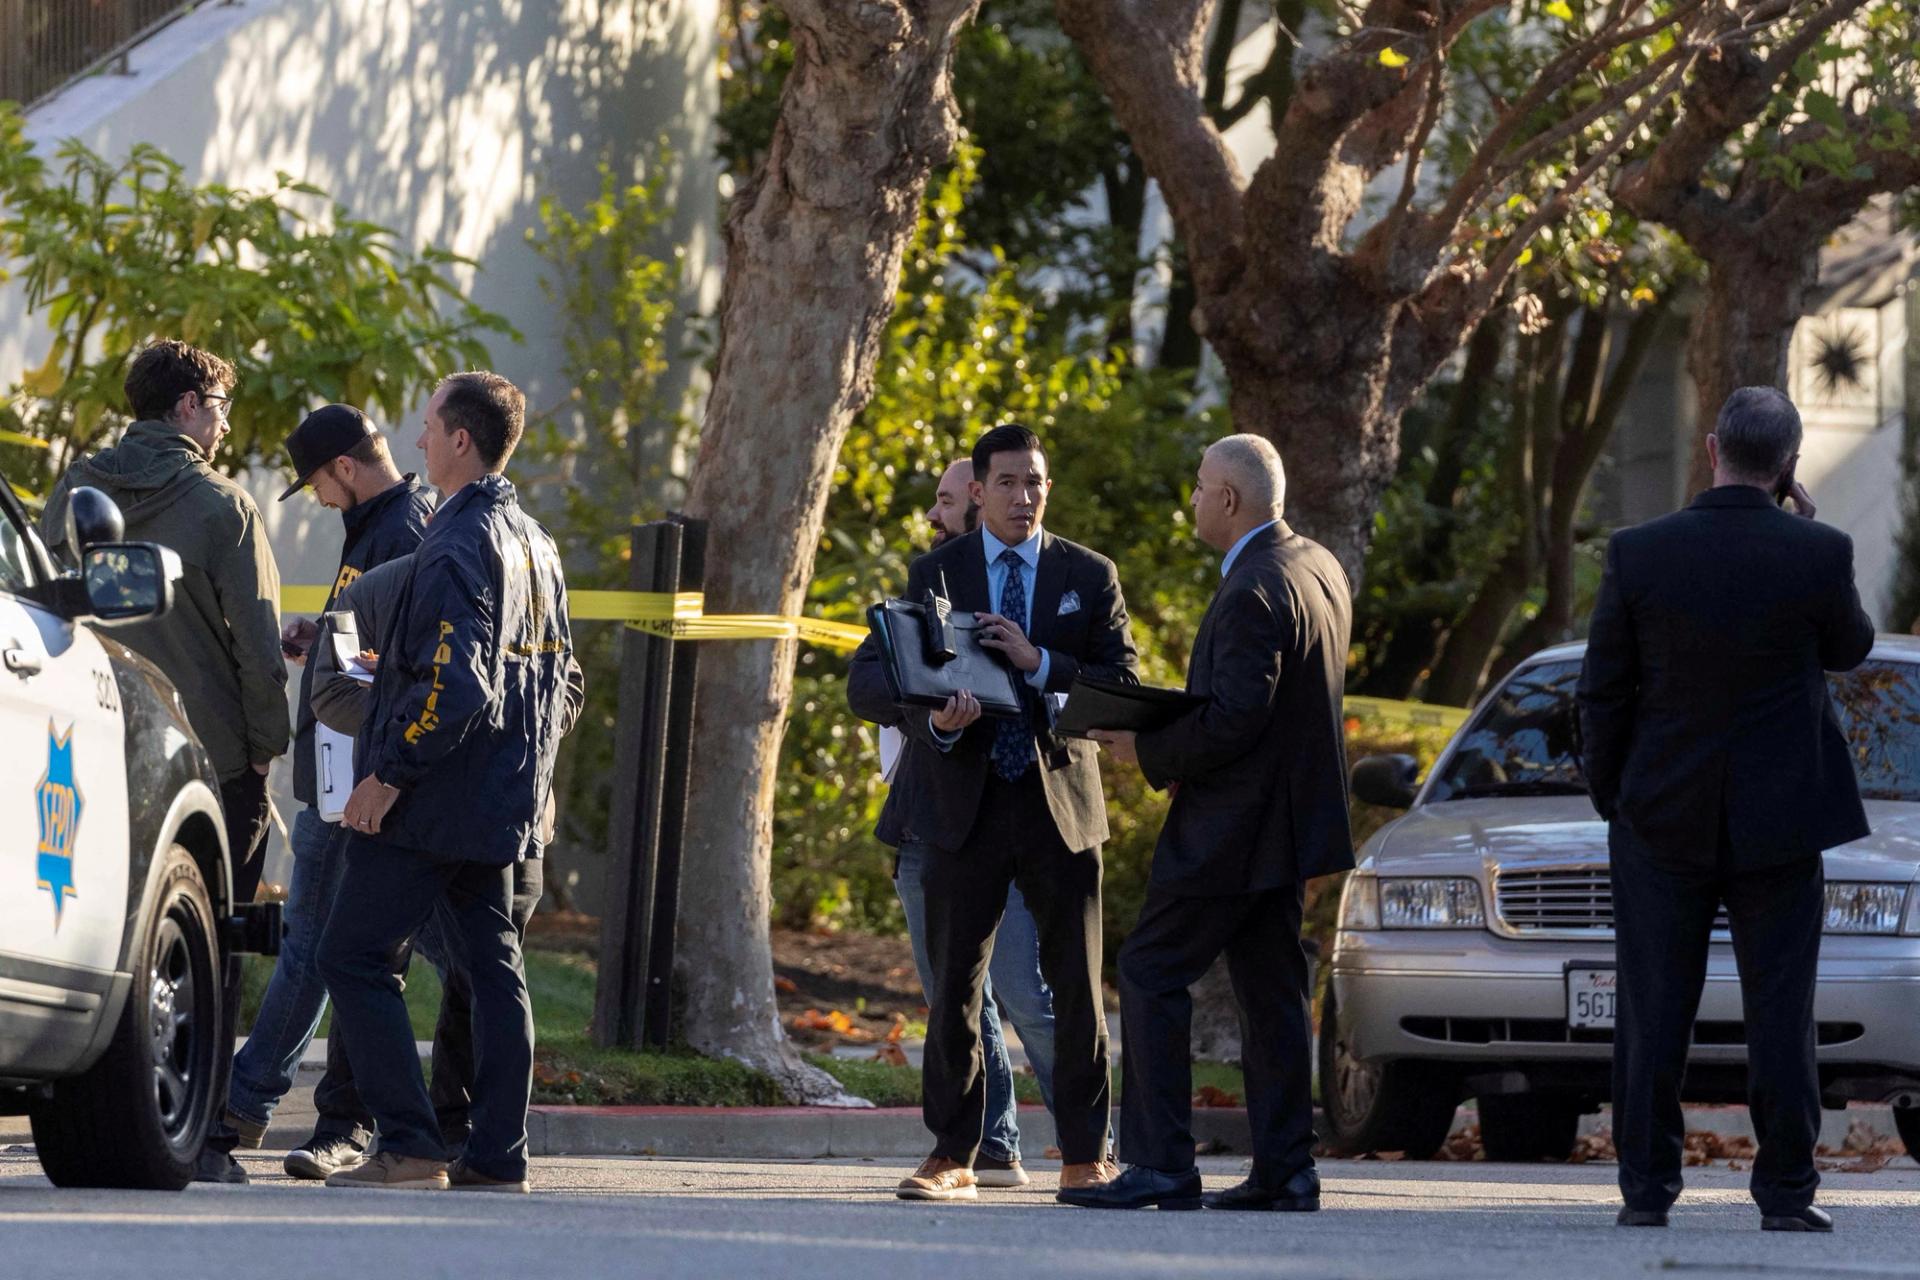 Members of law enforcement work outside the home of U.S. House Speaker Nancy Pelosi where her husband Paul Pelosi was violently assaulted after a break-in at their house, according to a statement from her office, in San Francisco, California, U.S., October 28, 2022. 